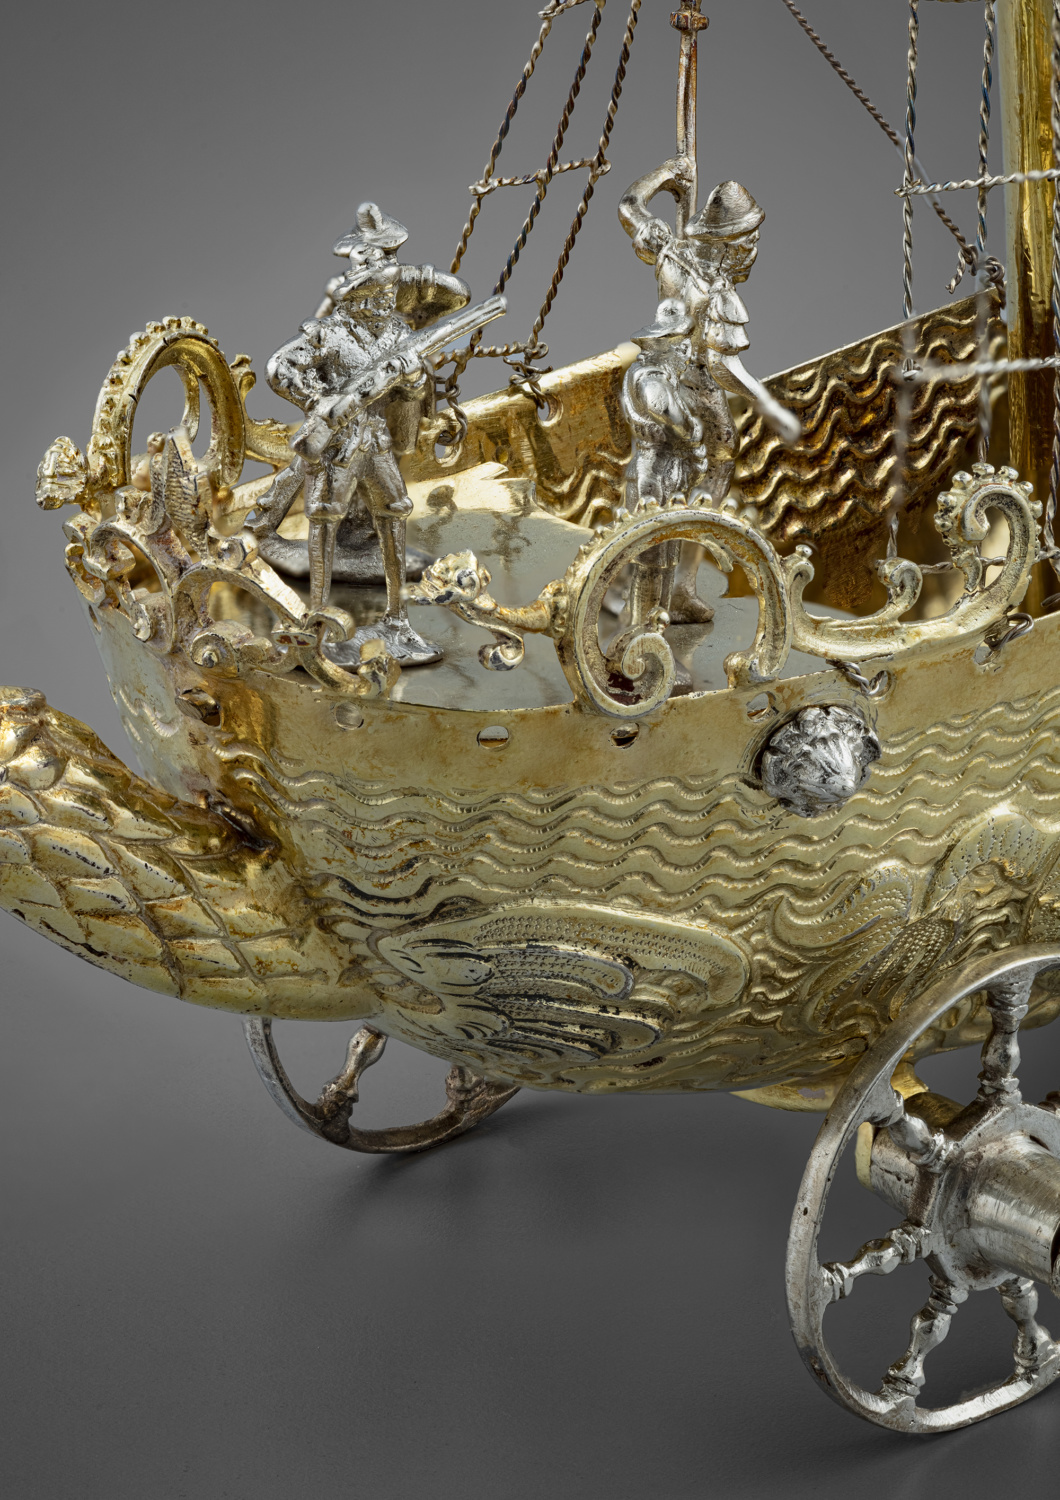 A silver and silver-gilt drinking cup in the shape of a vessel on wheels - Galerie Kugel